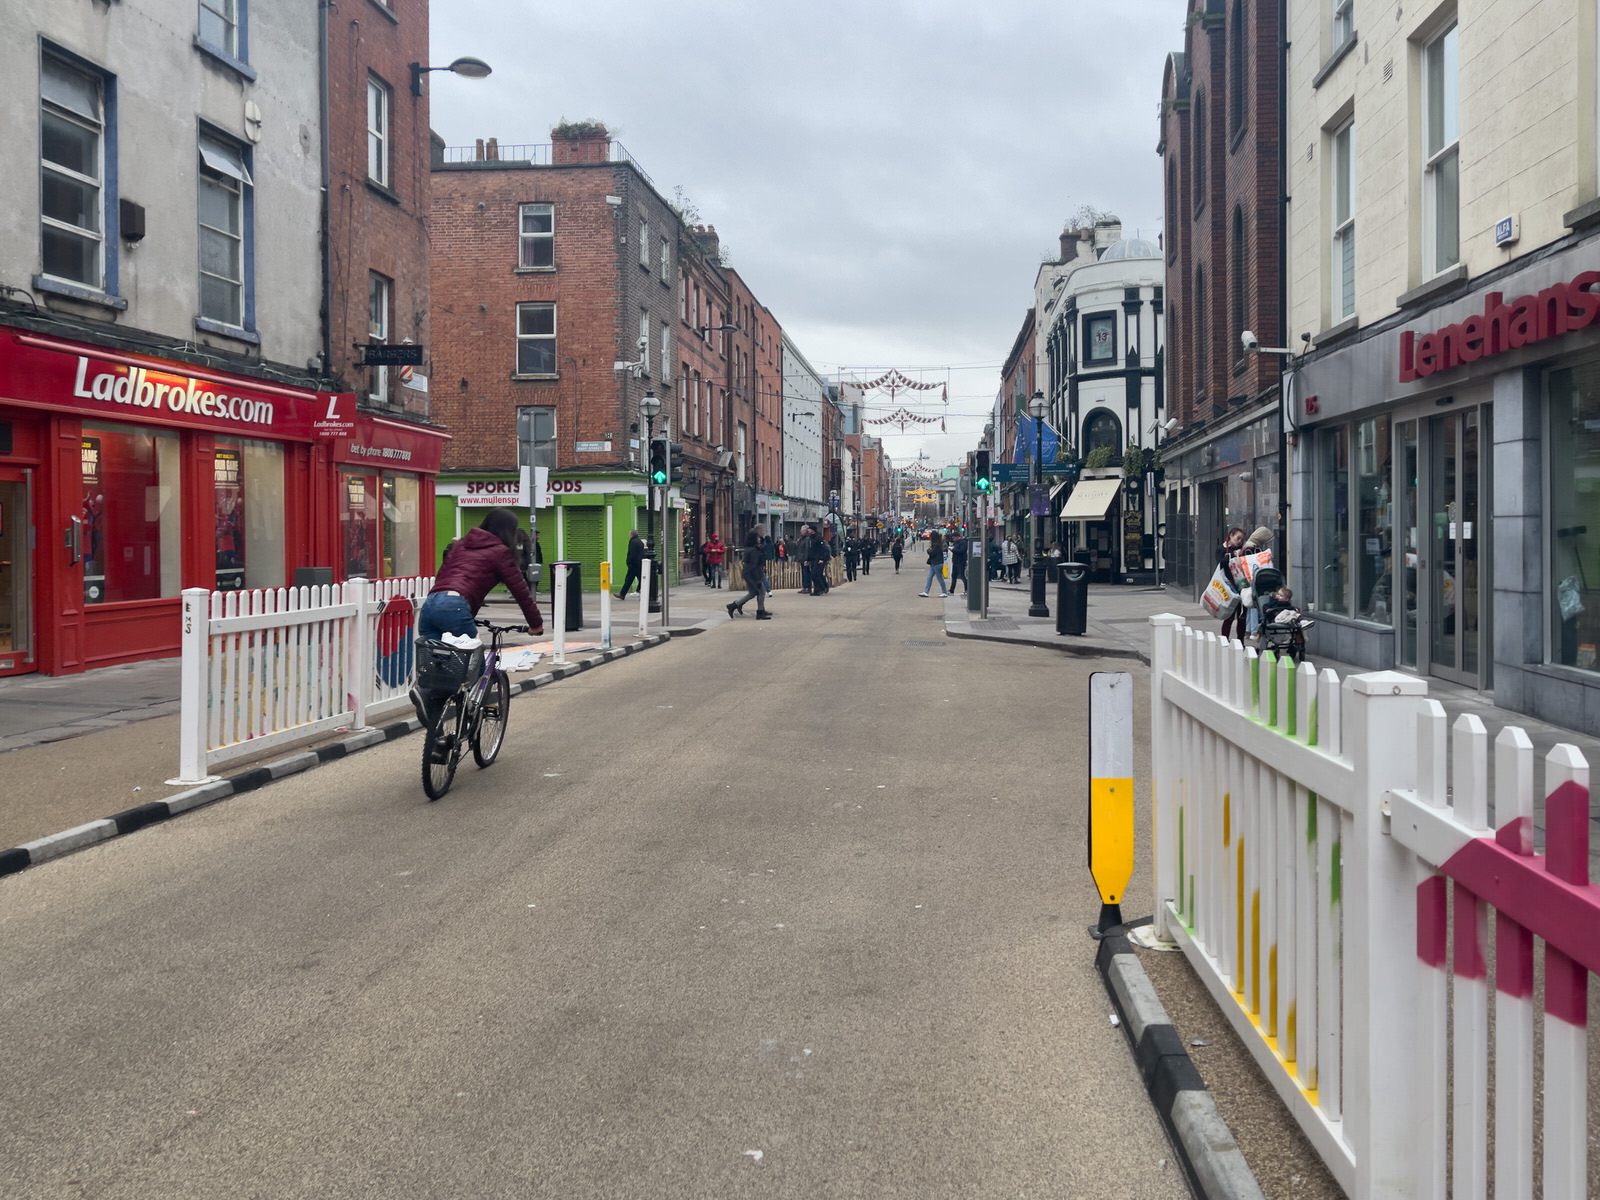 THE NEW STREET FURNITURE IS BEING INSTALLED ON CAPEL STREET [BUT THERE ARE FEW VISITORS TO BE SEEN TODAY]-225425-1